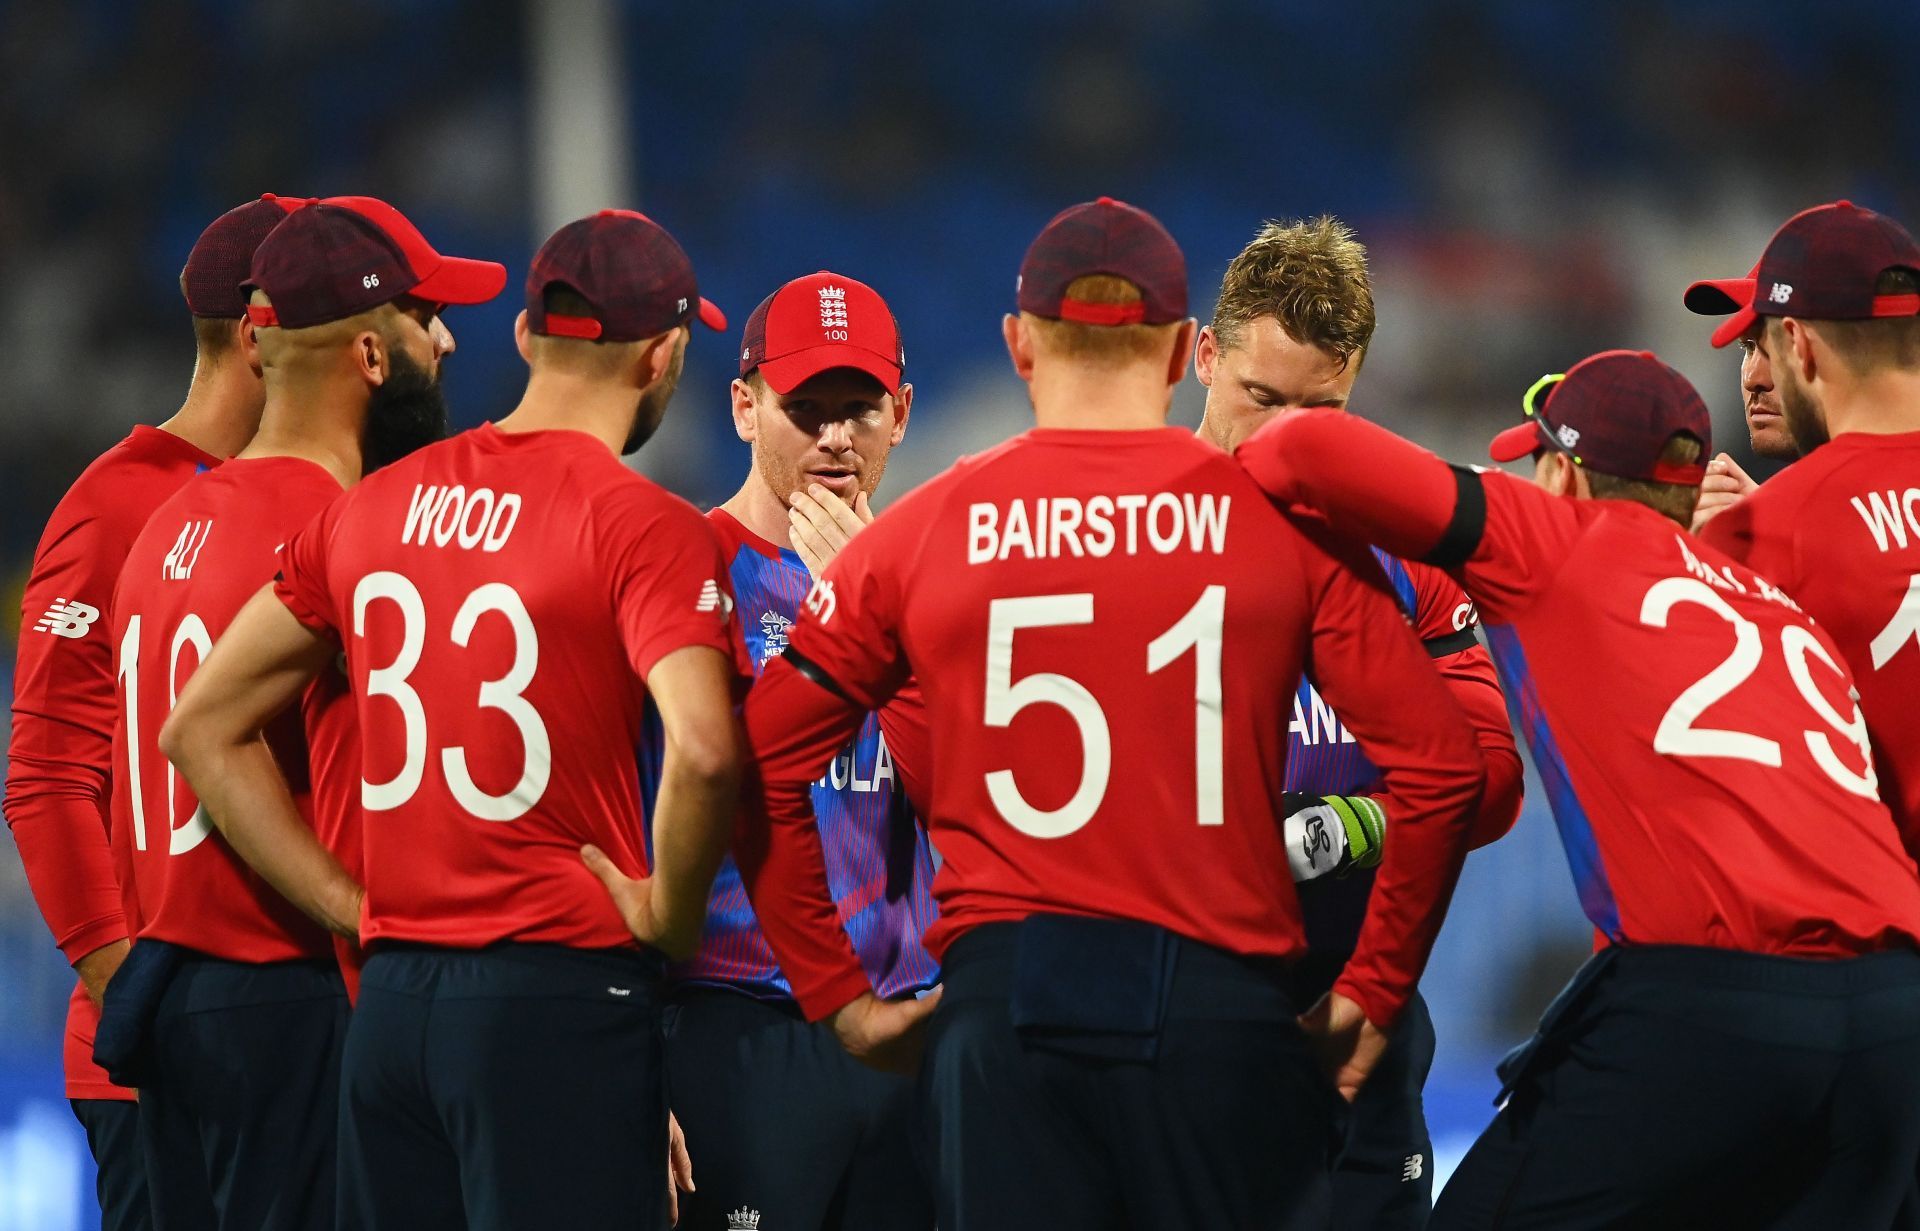 England cricket team. Pic: Getty Images